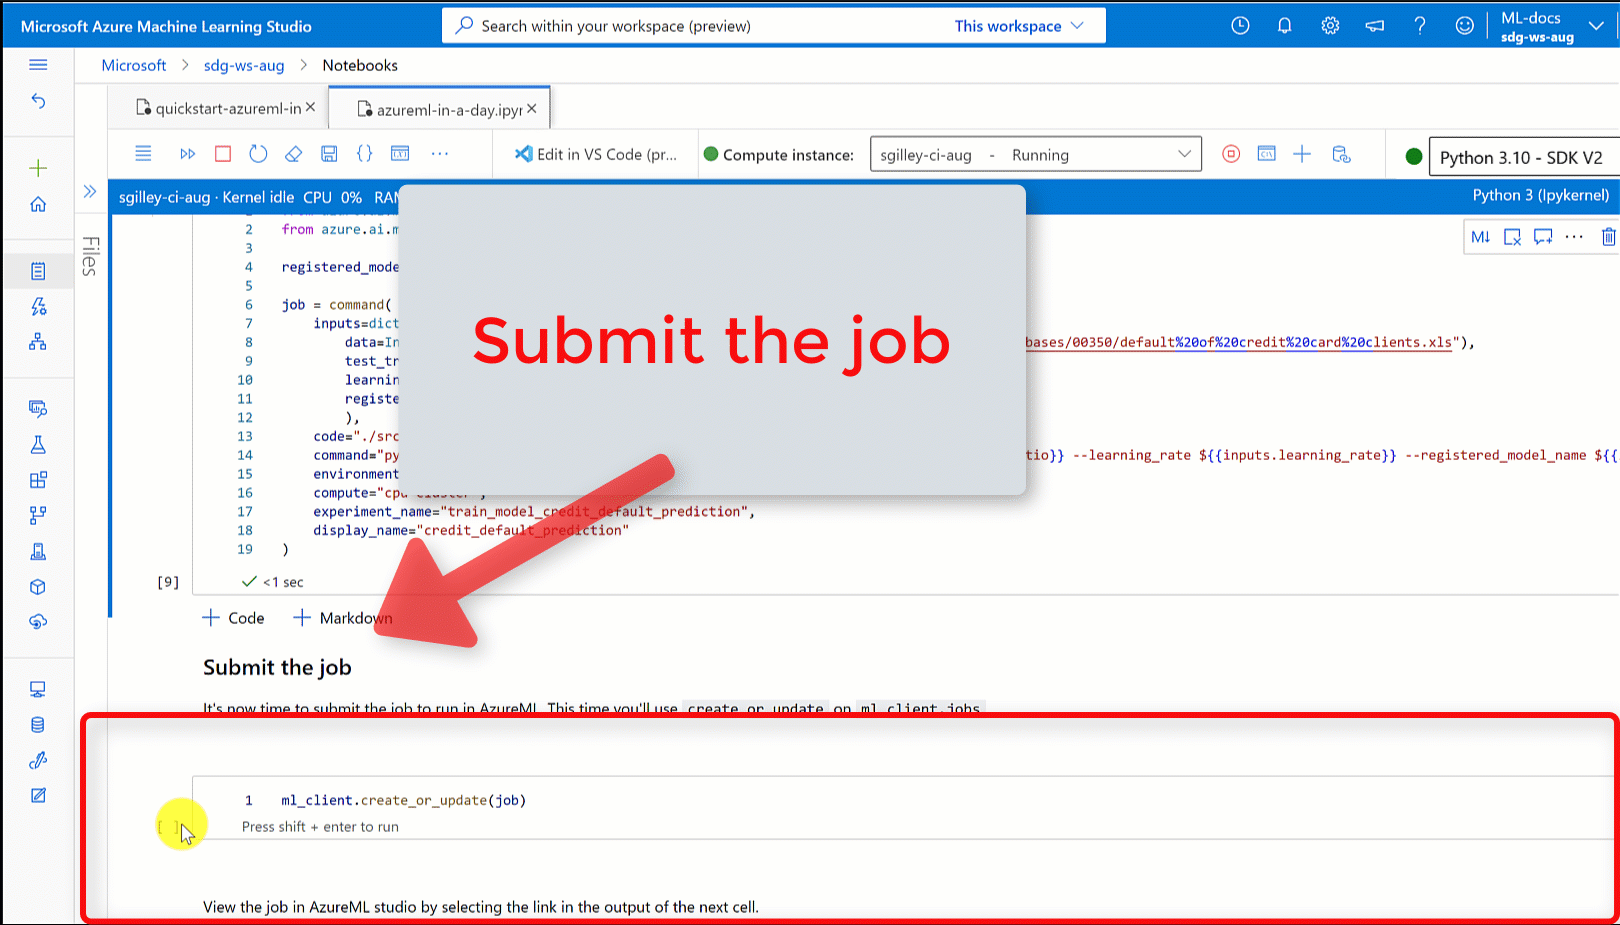 Screenshot shows the overview page for the job.